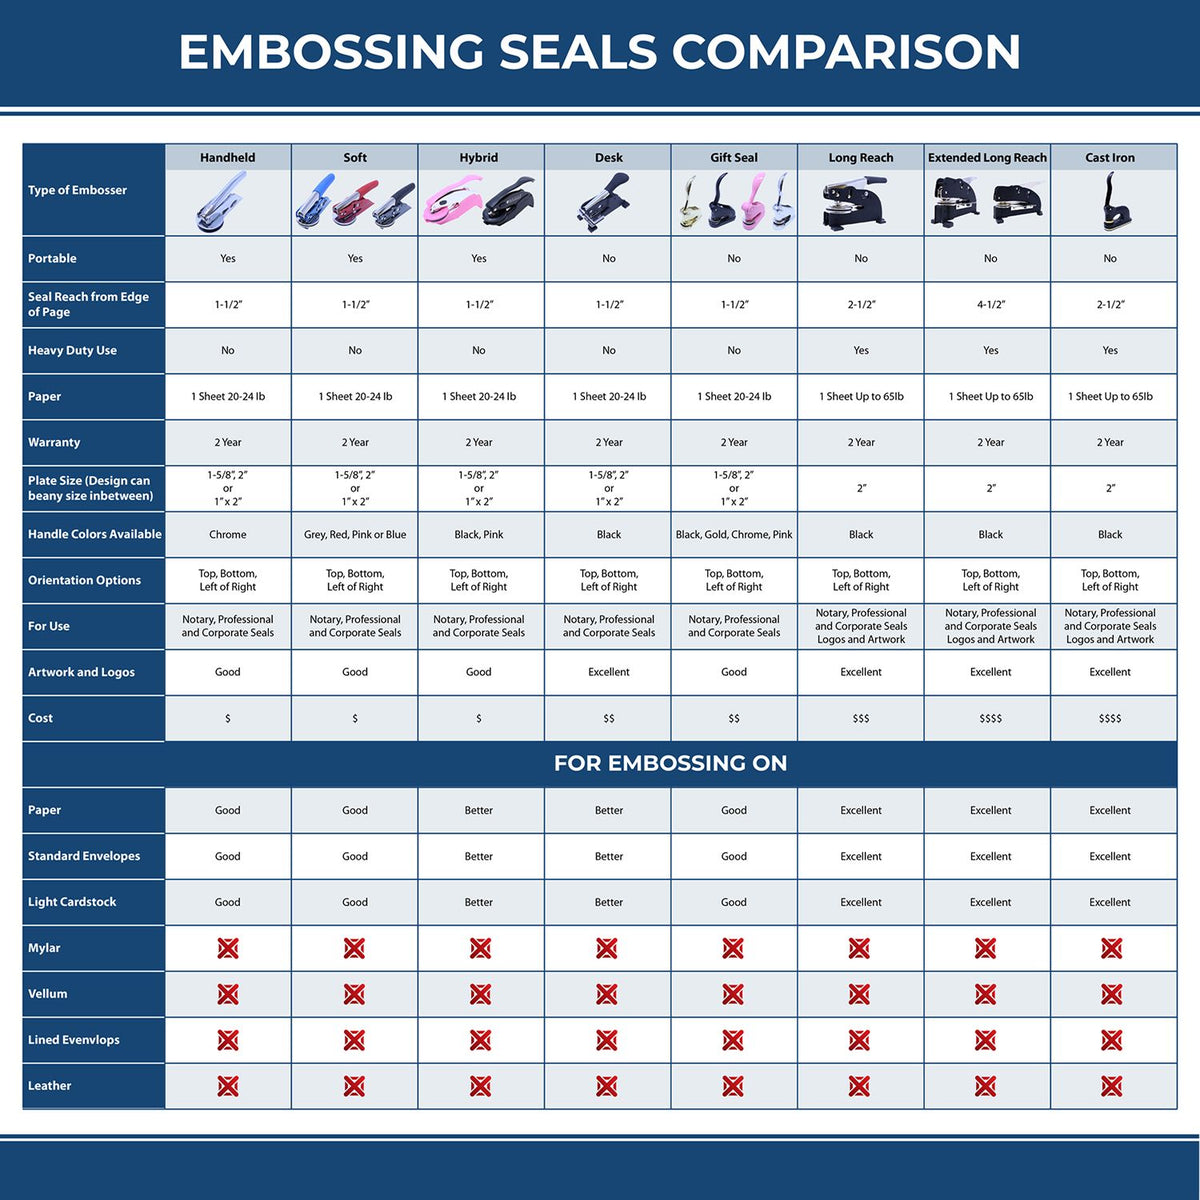 A comparison chart for the different types of mount models available for the Handheld Virginia Professional Geologist Embosser